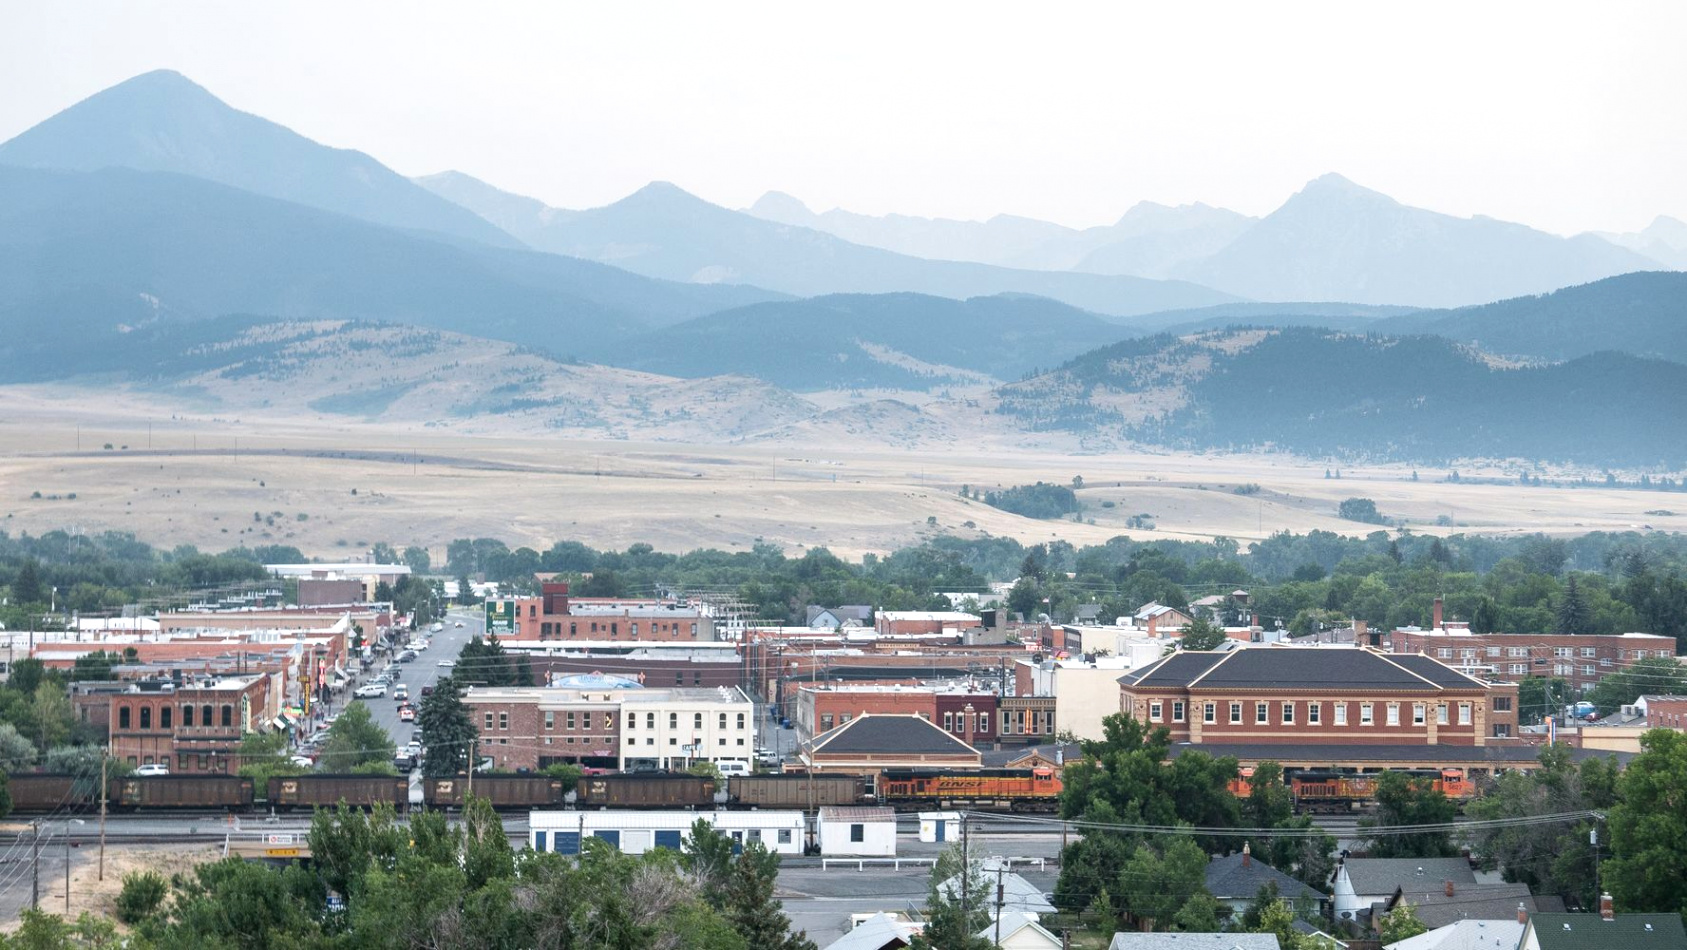 Small Business software In Livingston Mo Dans the Railroad Put This Montana town On the Map. but It Left Behind ...